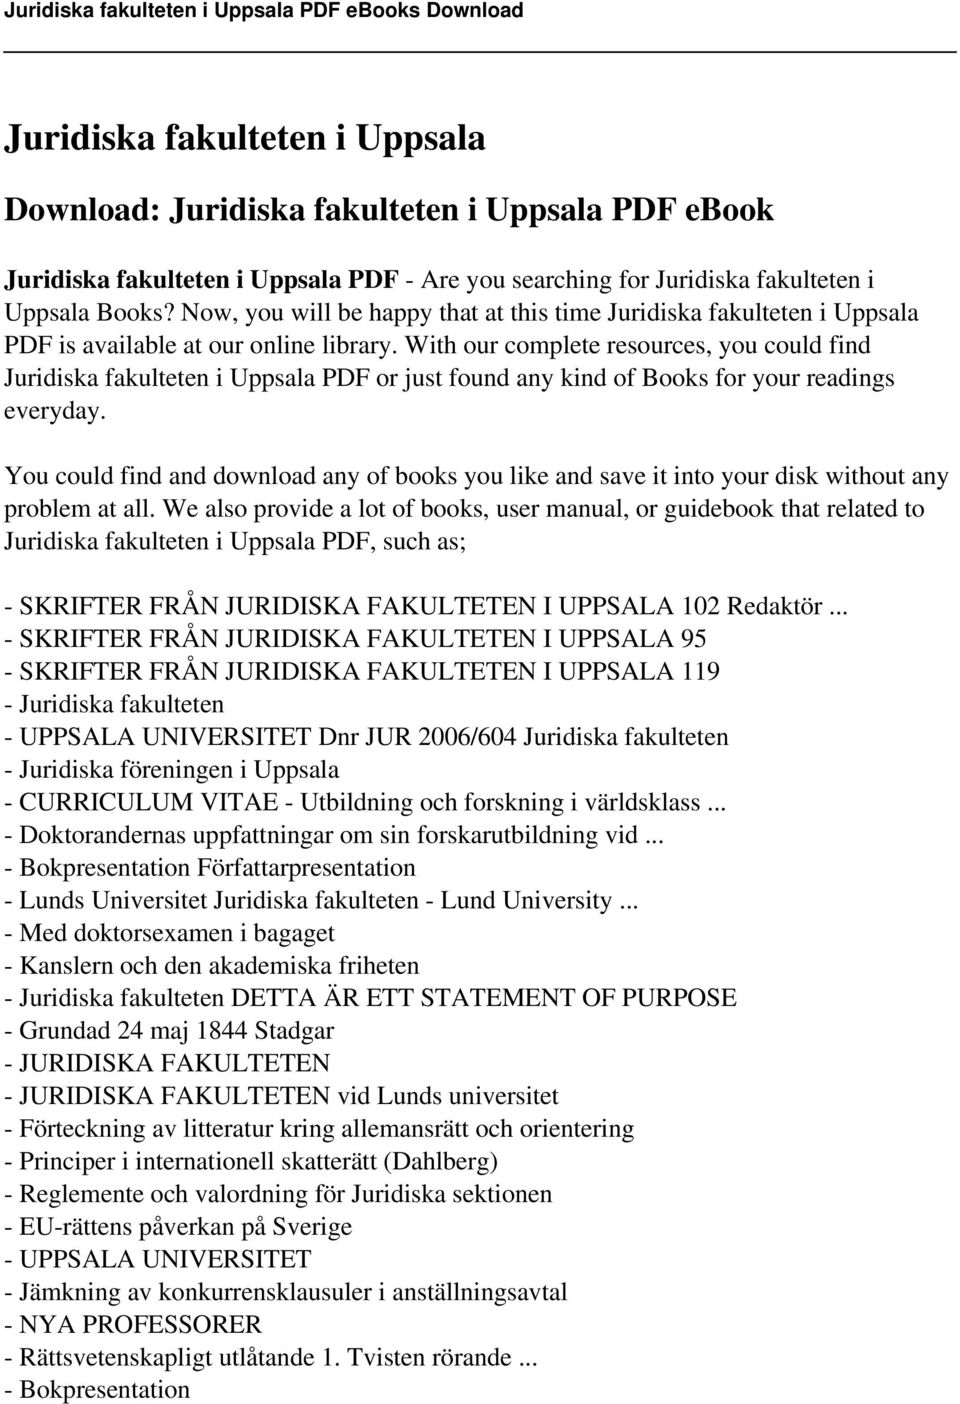 With our complete resources, you could find Juridiska fakulteten i Uppsala PDF or just found any kind of Books for your readings everyday.